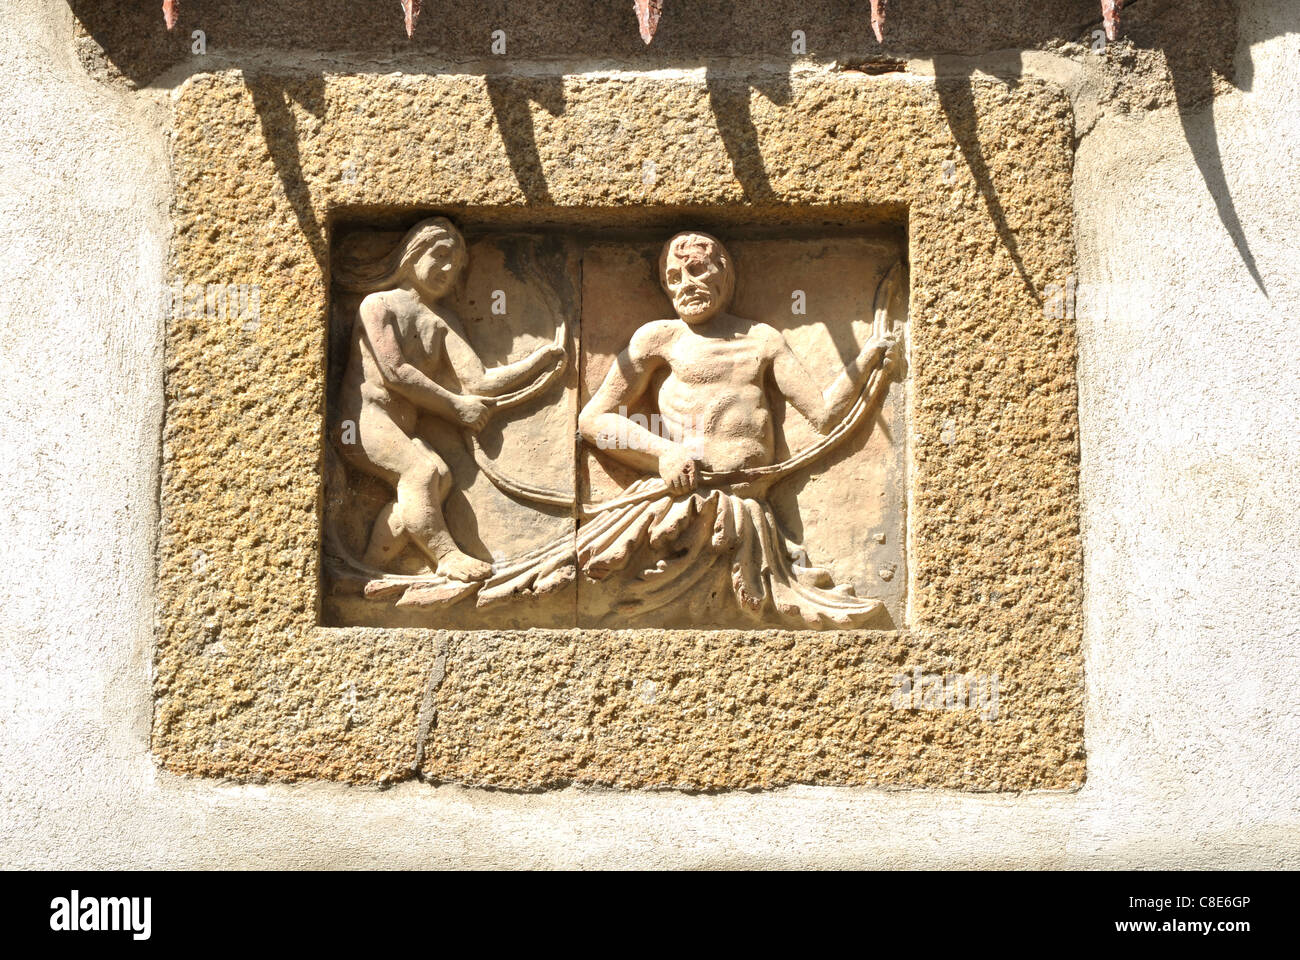 Sculpture in stone on the wall of a home, Haute ville of Granville (Granville, Normandy, France). Stock Photo